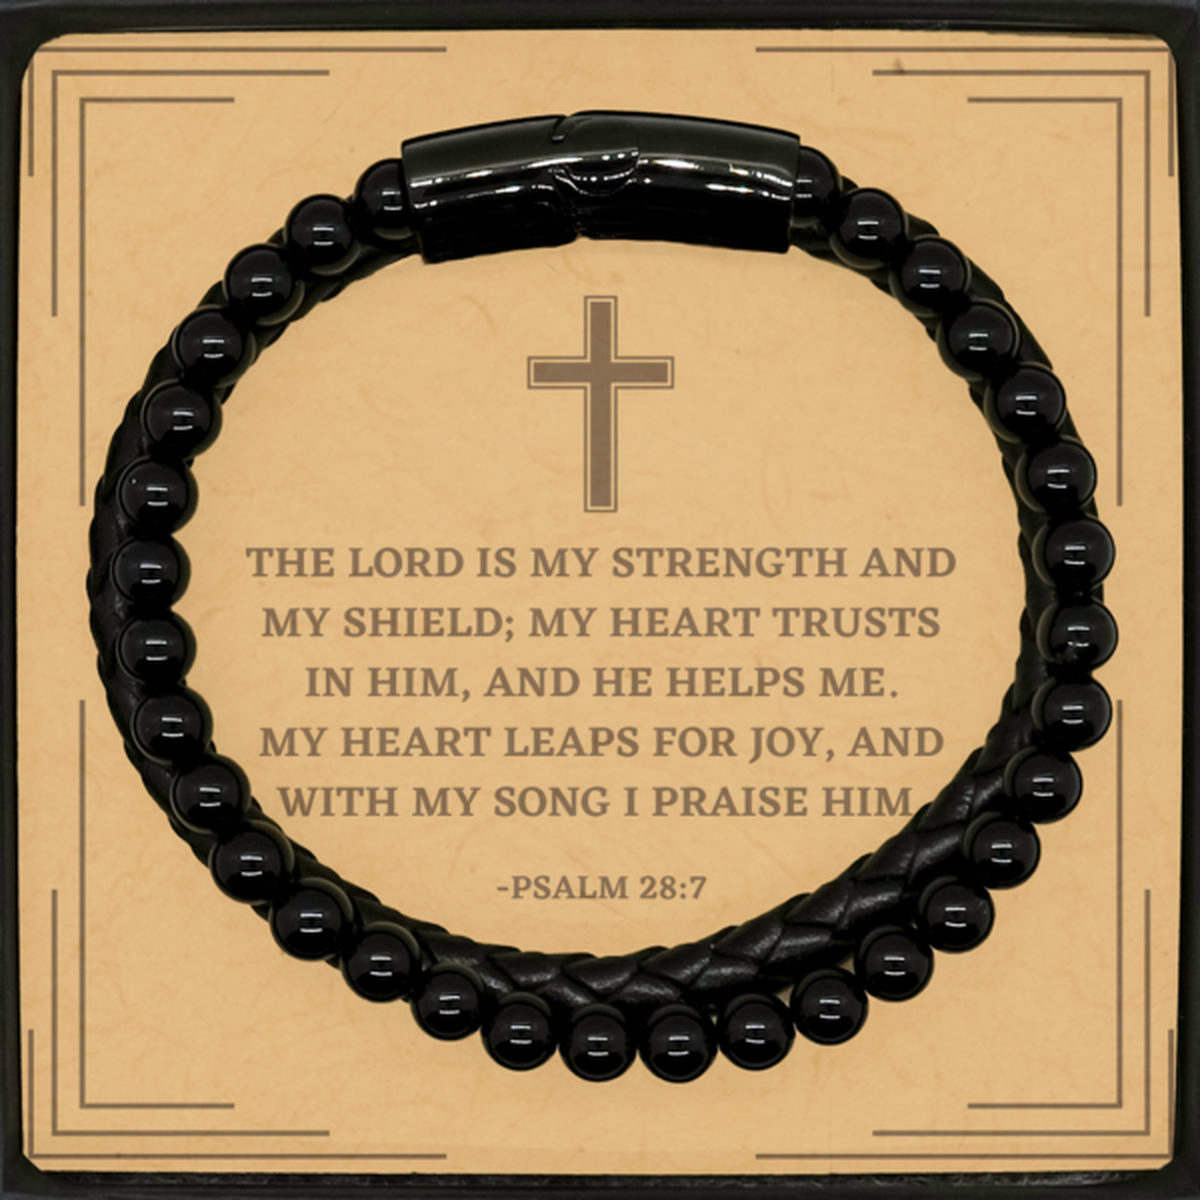 Baptism Gifts For Teenage Boys Girls, Christian Bible Verse Stone Leather Bracelet, The Lord is my strength and my shield, Confirmation Gifts, Bible Verse Card for Son, Godson, Grandson